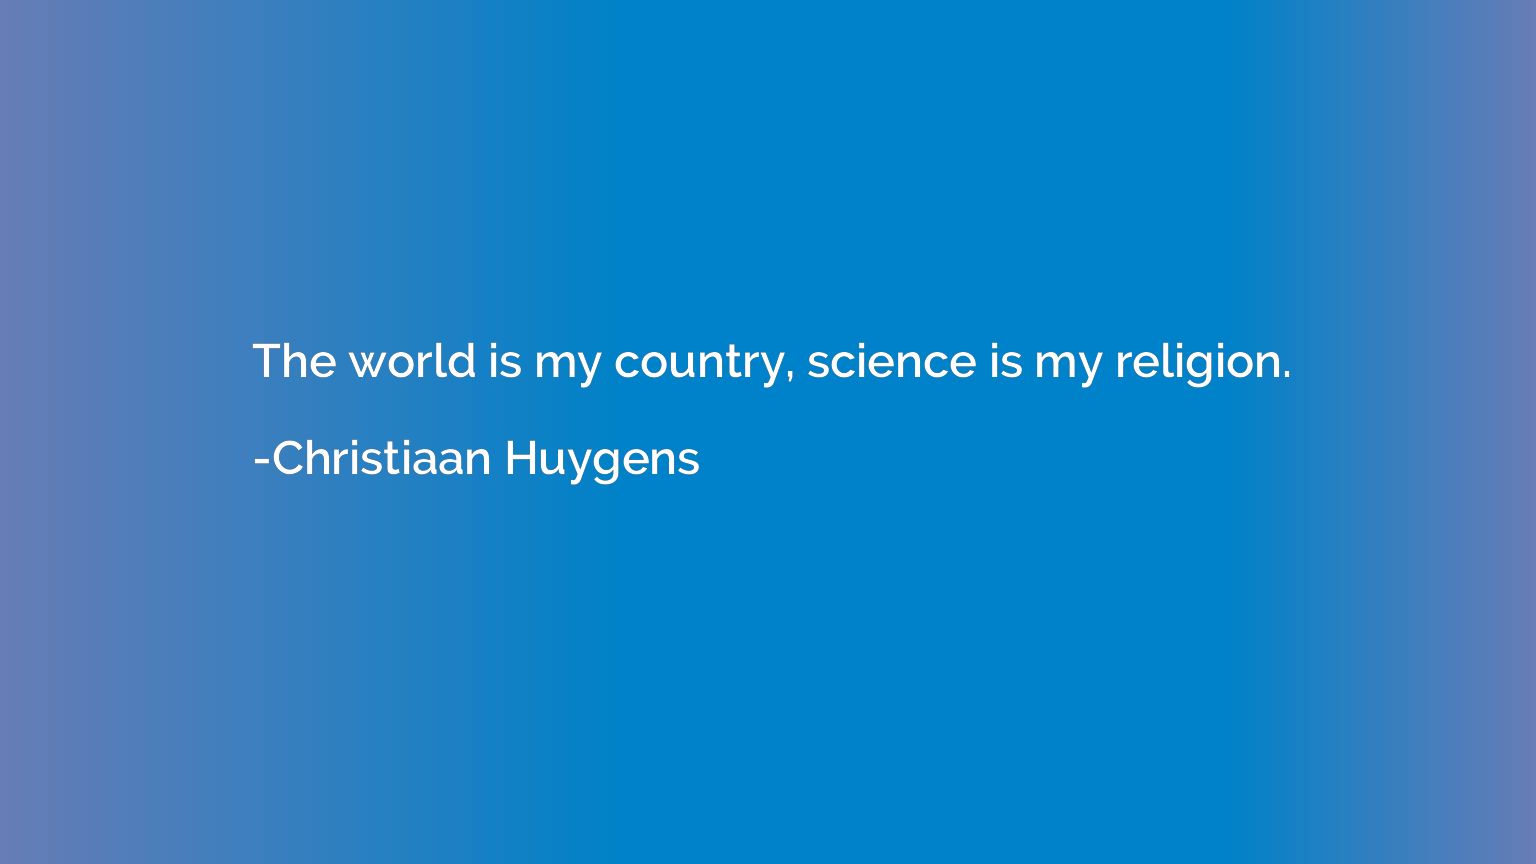 The world is my country, science is my religion.